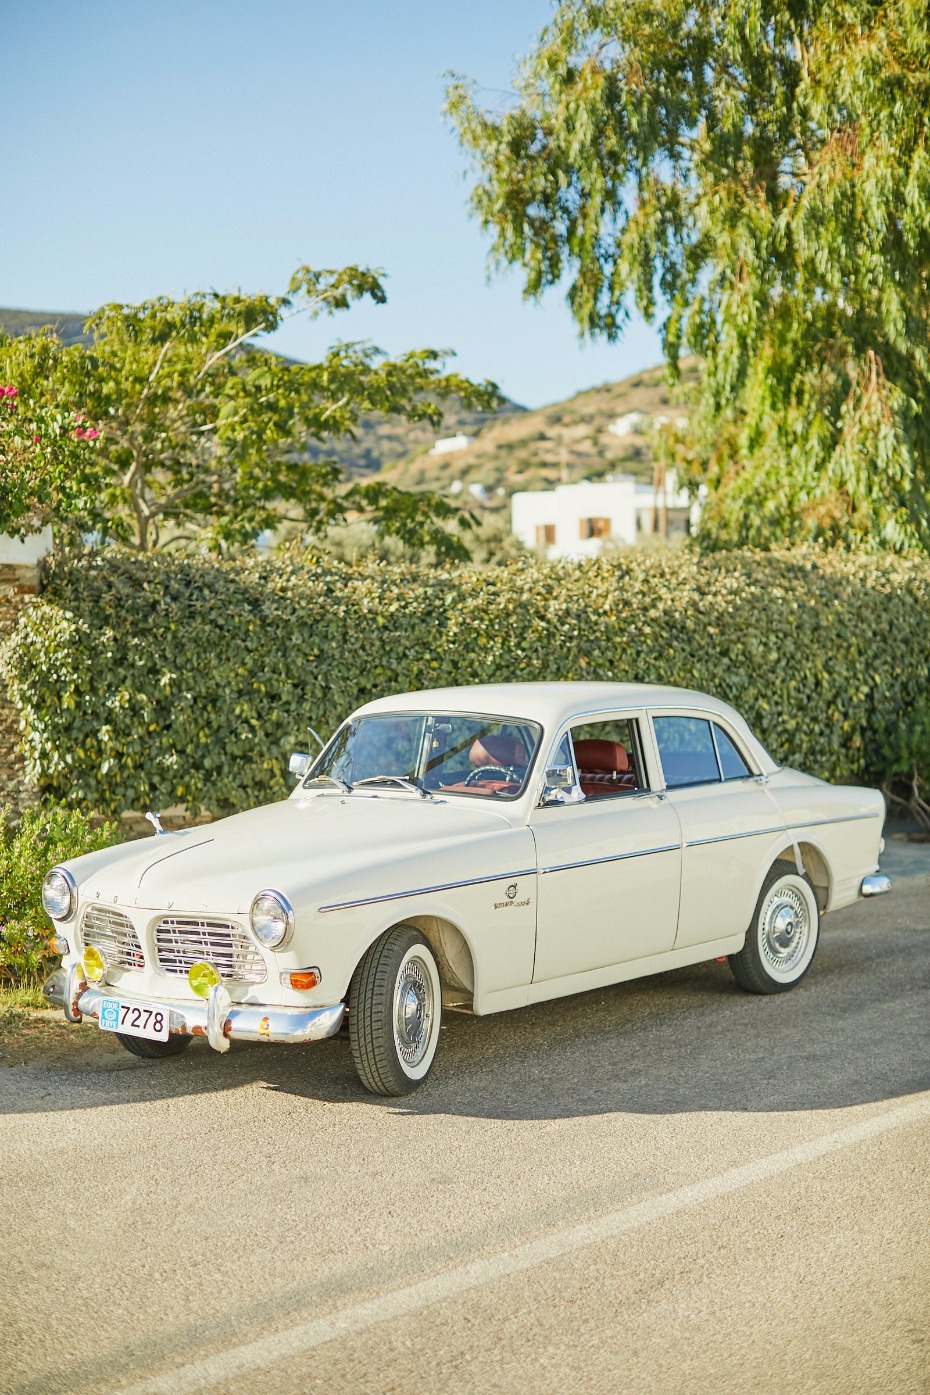 vintage wedding car for the brides ride to the ceremony